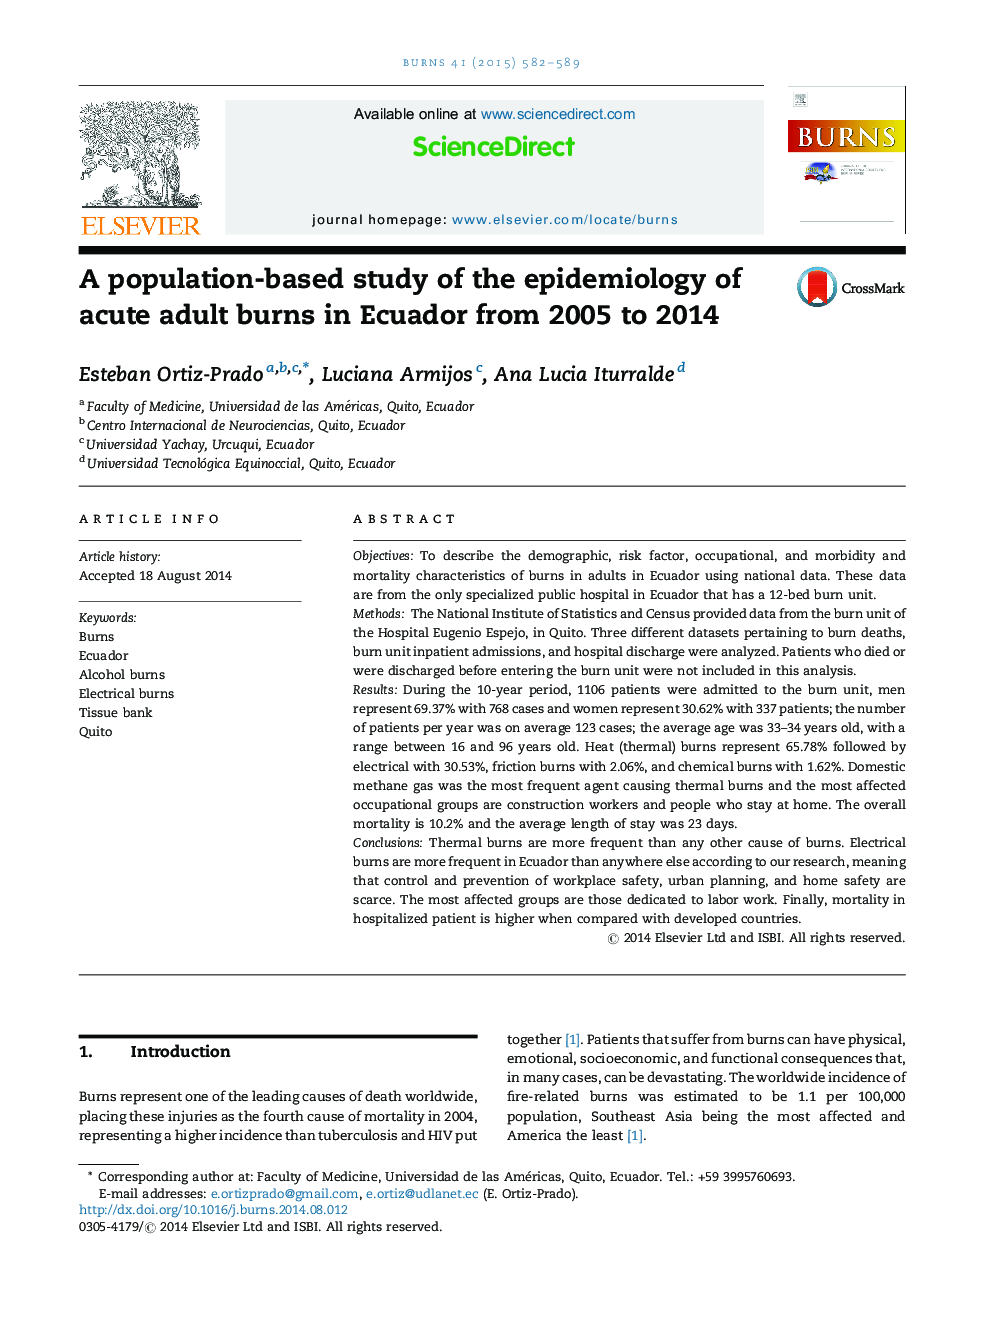 A population-based study of the epidemiology of acute adult burns in Ecuador from 2005 to 2014